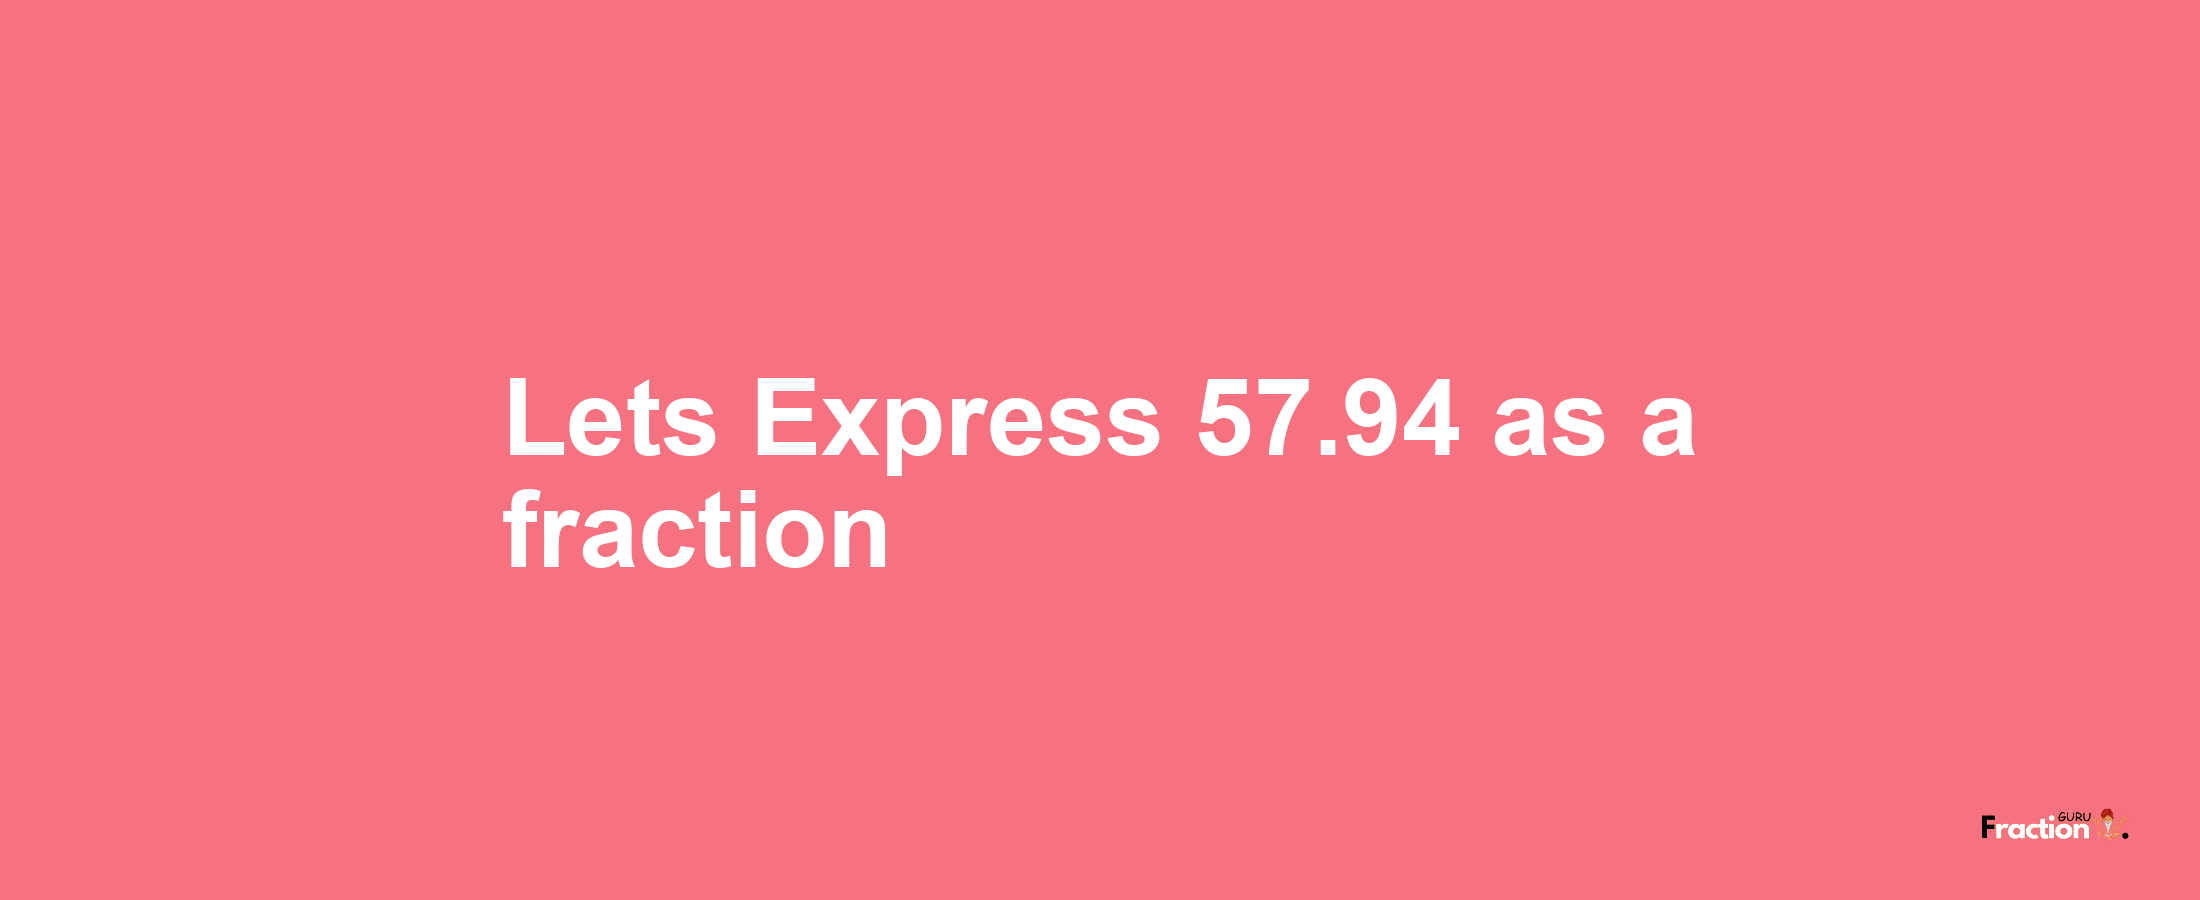 Lets Express 57.94 as afraction